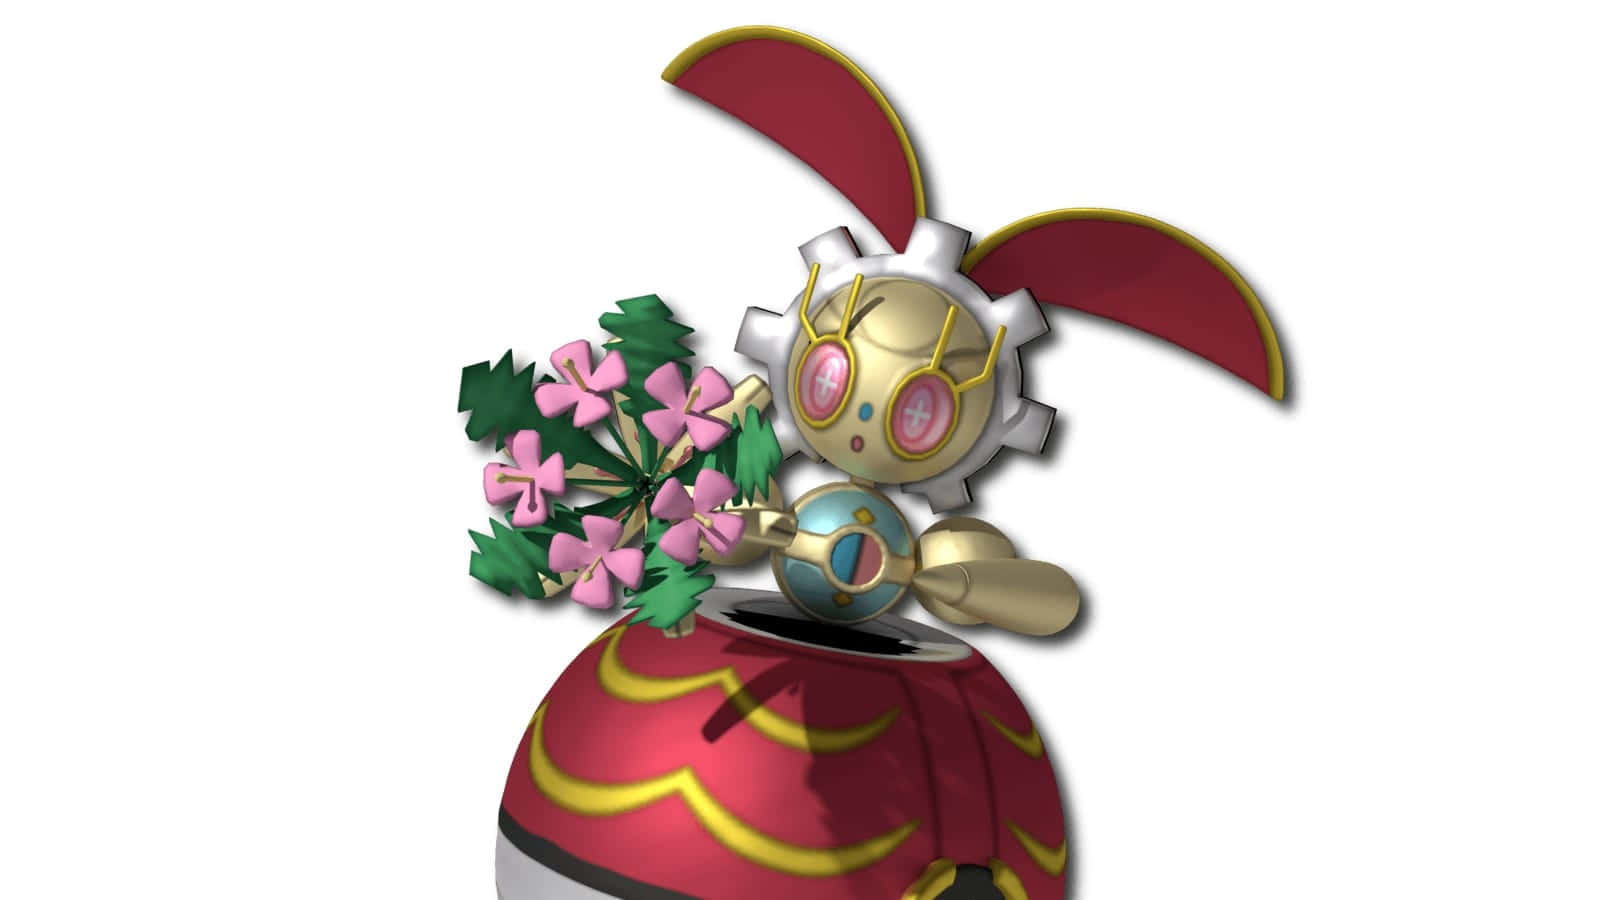 Red And Gold Magearna Holding Flowers Wallpaper